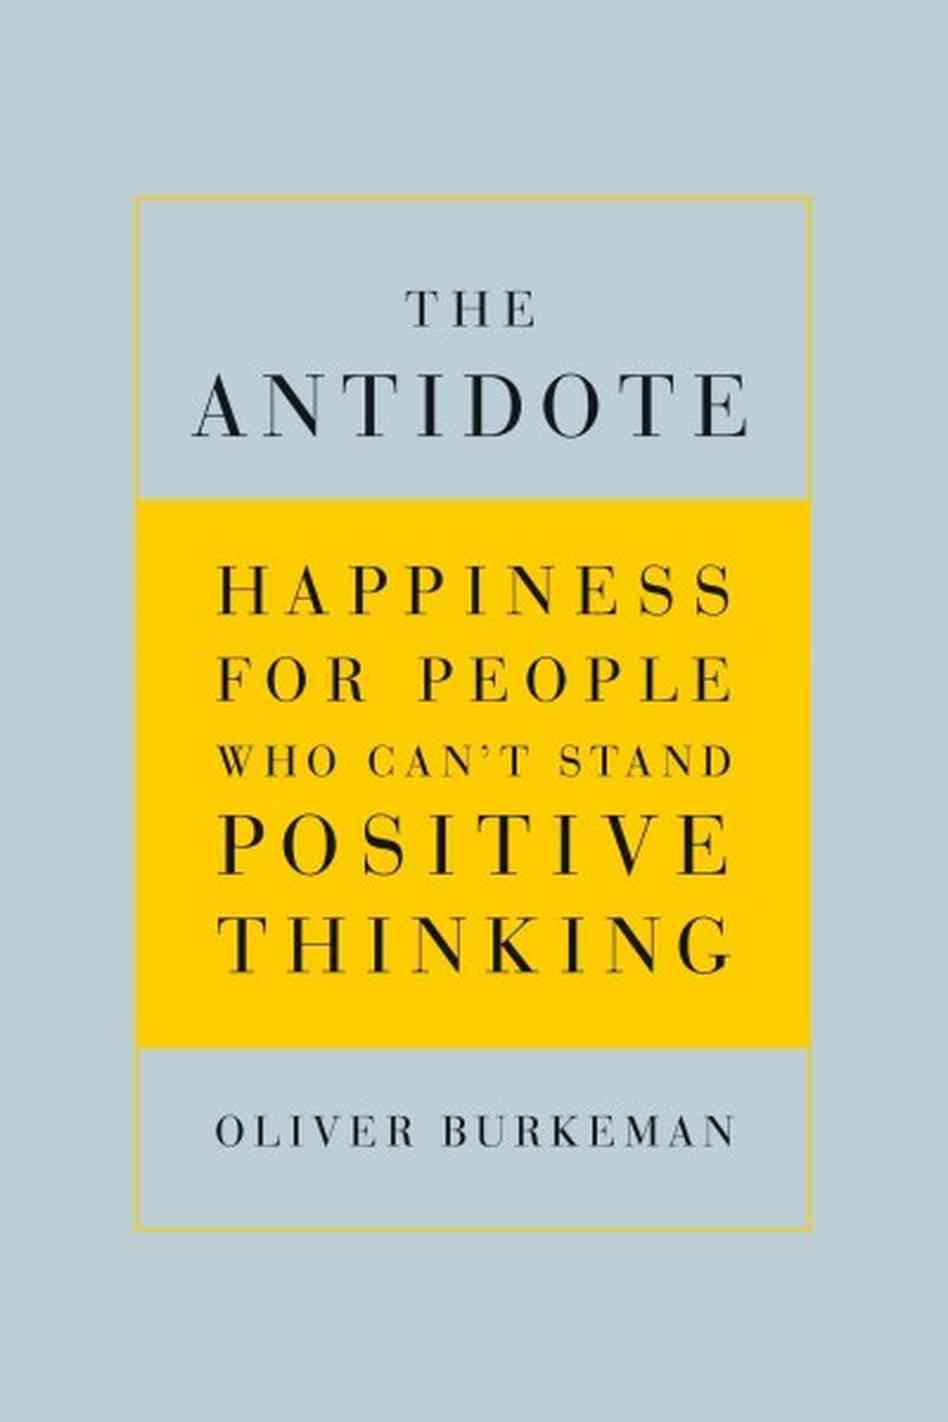 Book Review of The Antidote: Happiness For People Who Can't Stand Positive Thinking by Oliver Burkman